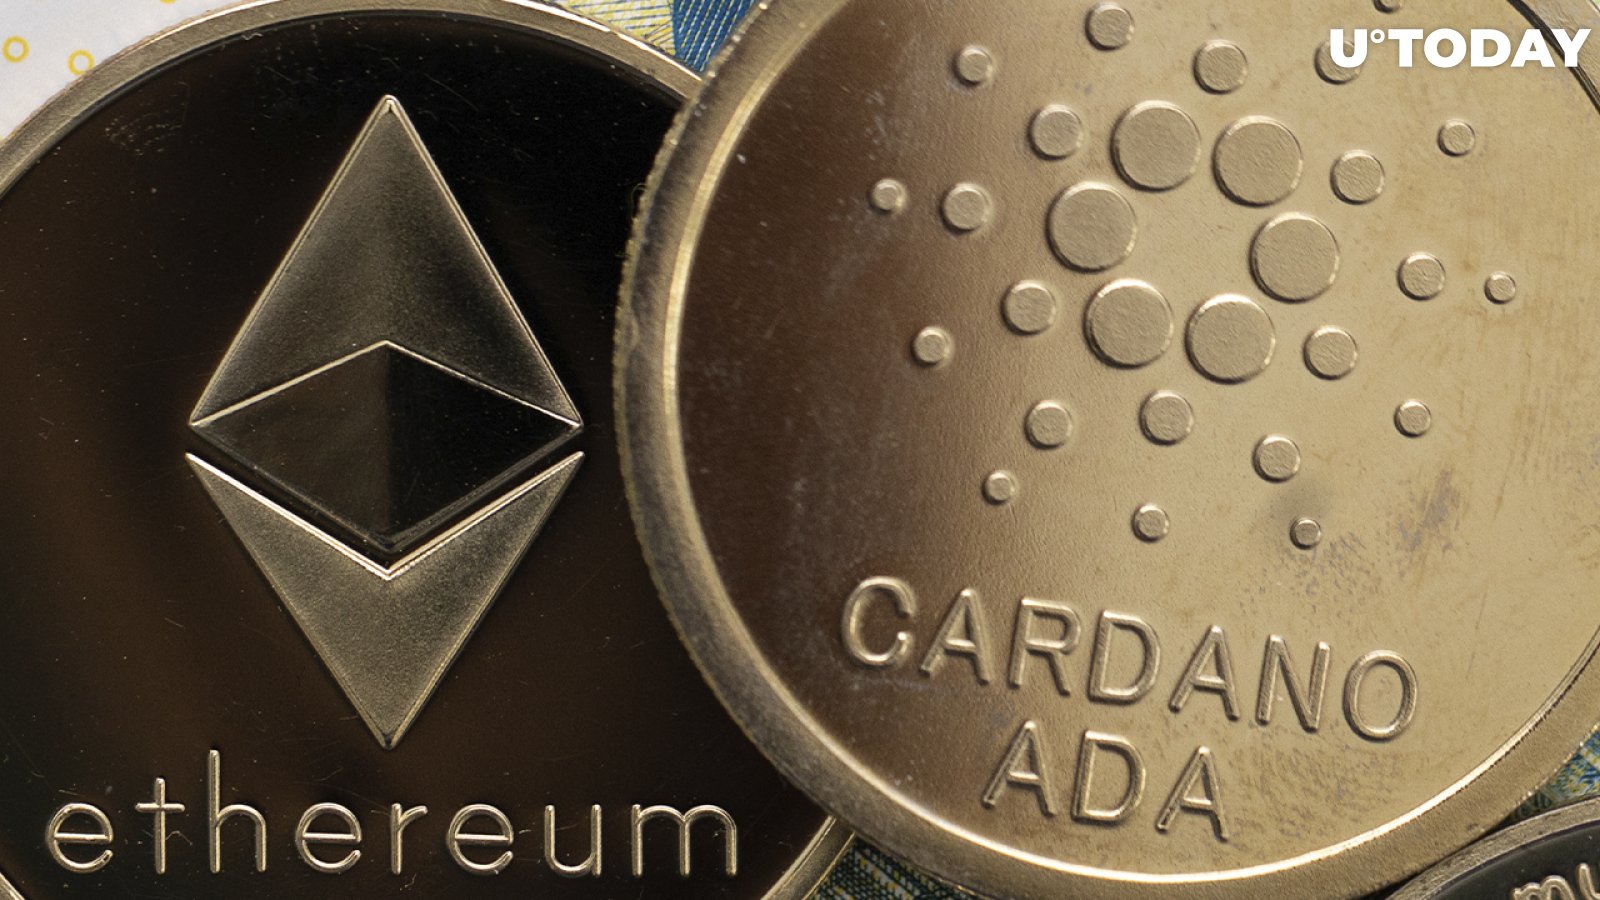 Cardano Interoperability with Ethereum in the Works as Bridge Testnet Launches: Details